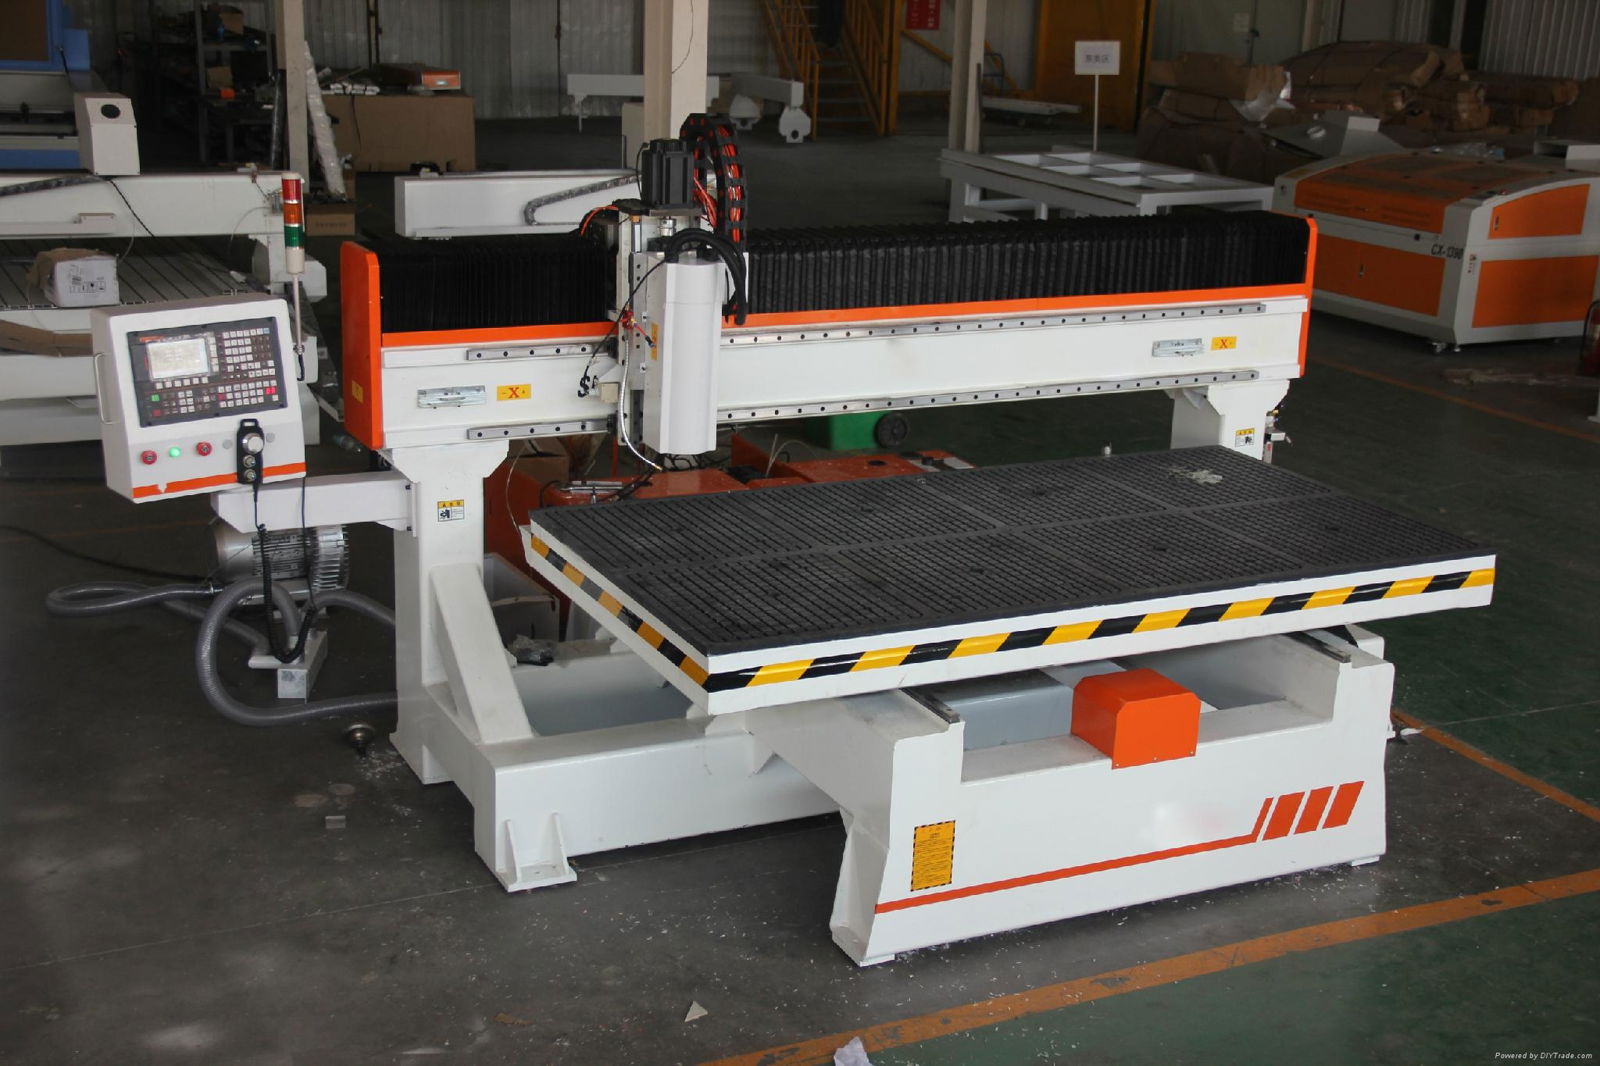 XL2520 ATC CNC routerTable Moving Processing Center 5